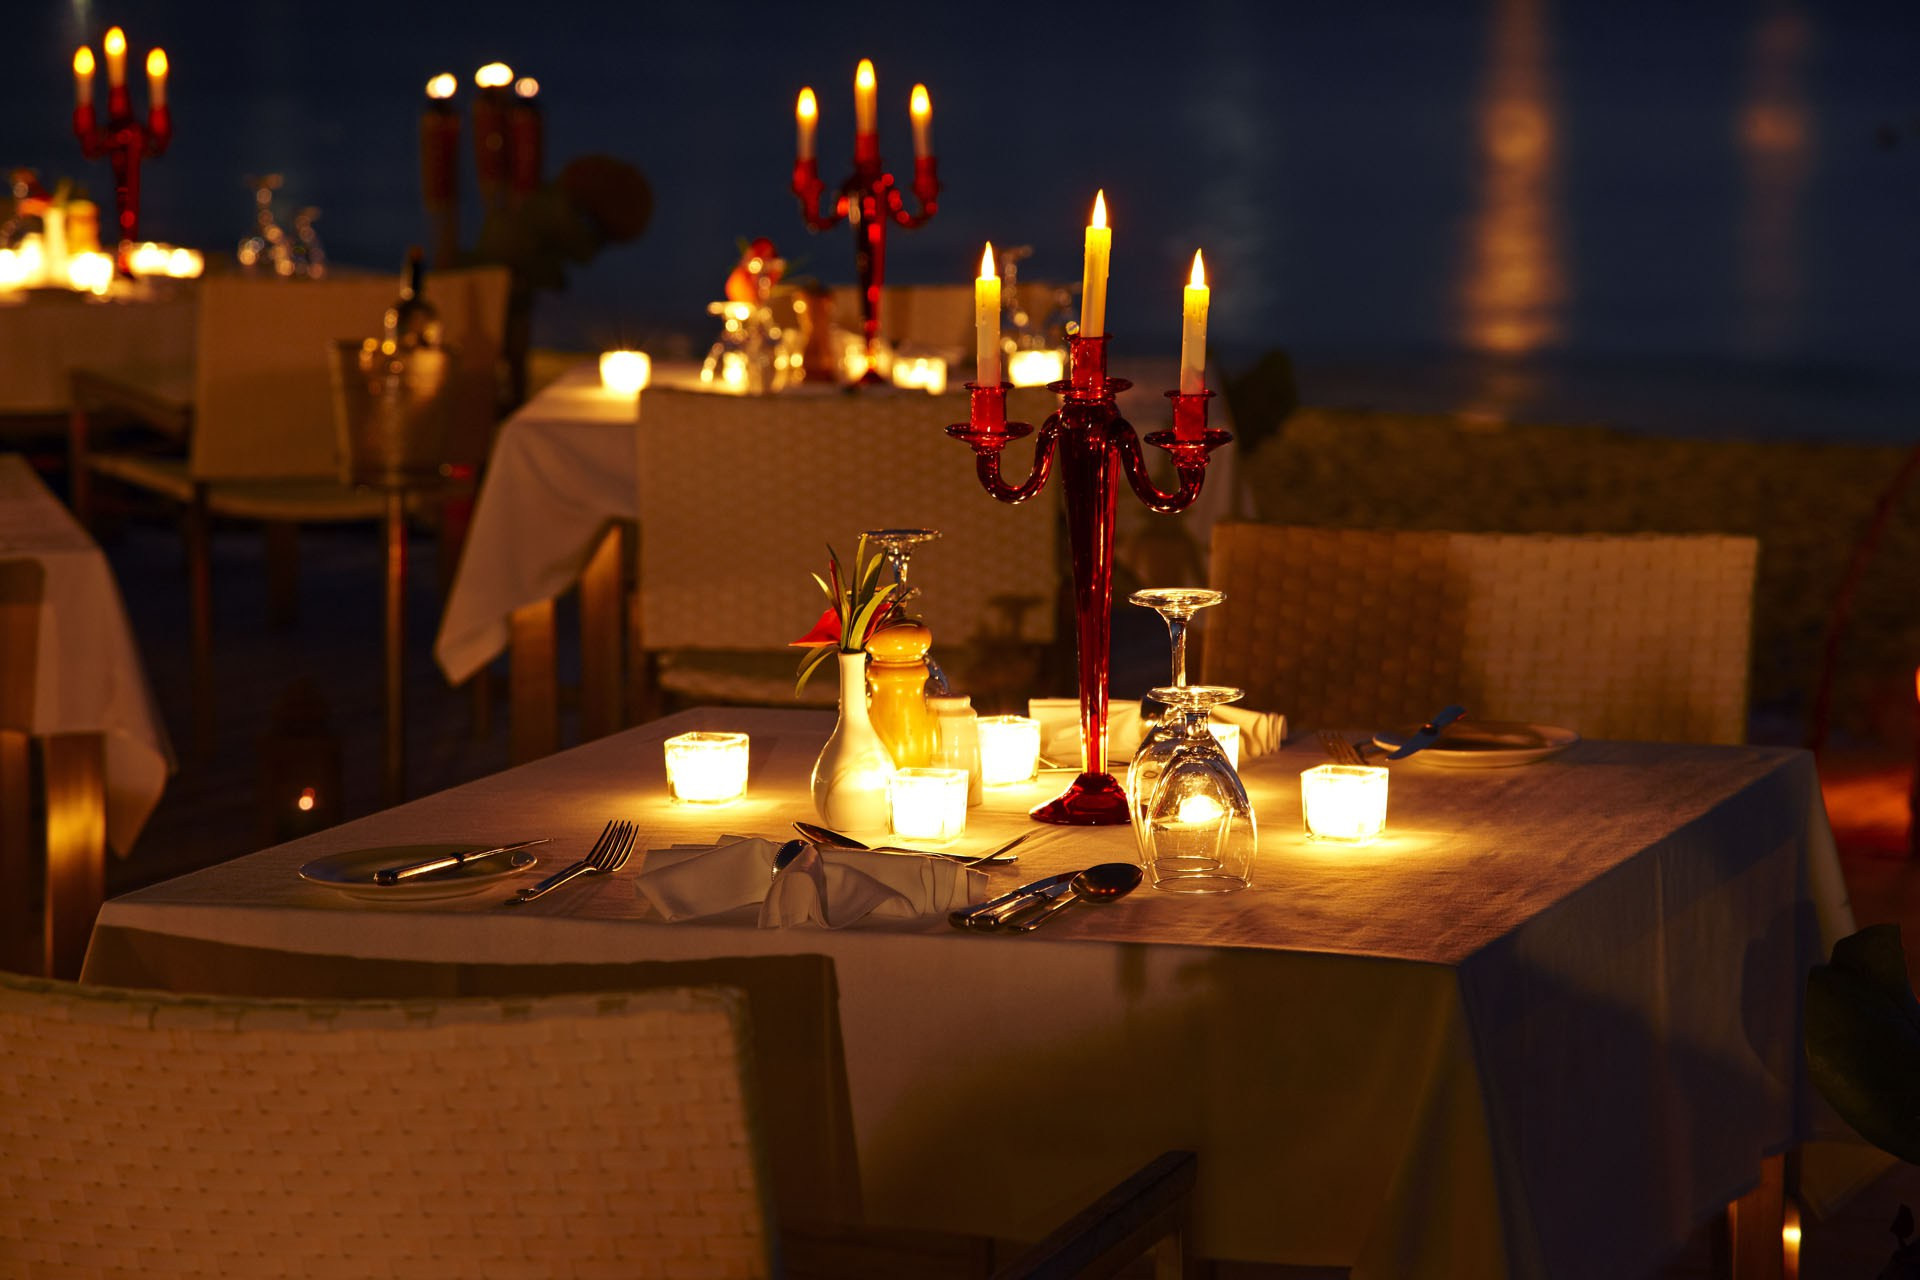 Romantic Dinner Date Ideas
 What Happened To Dinner Dates